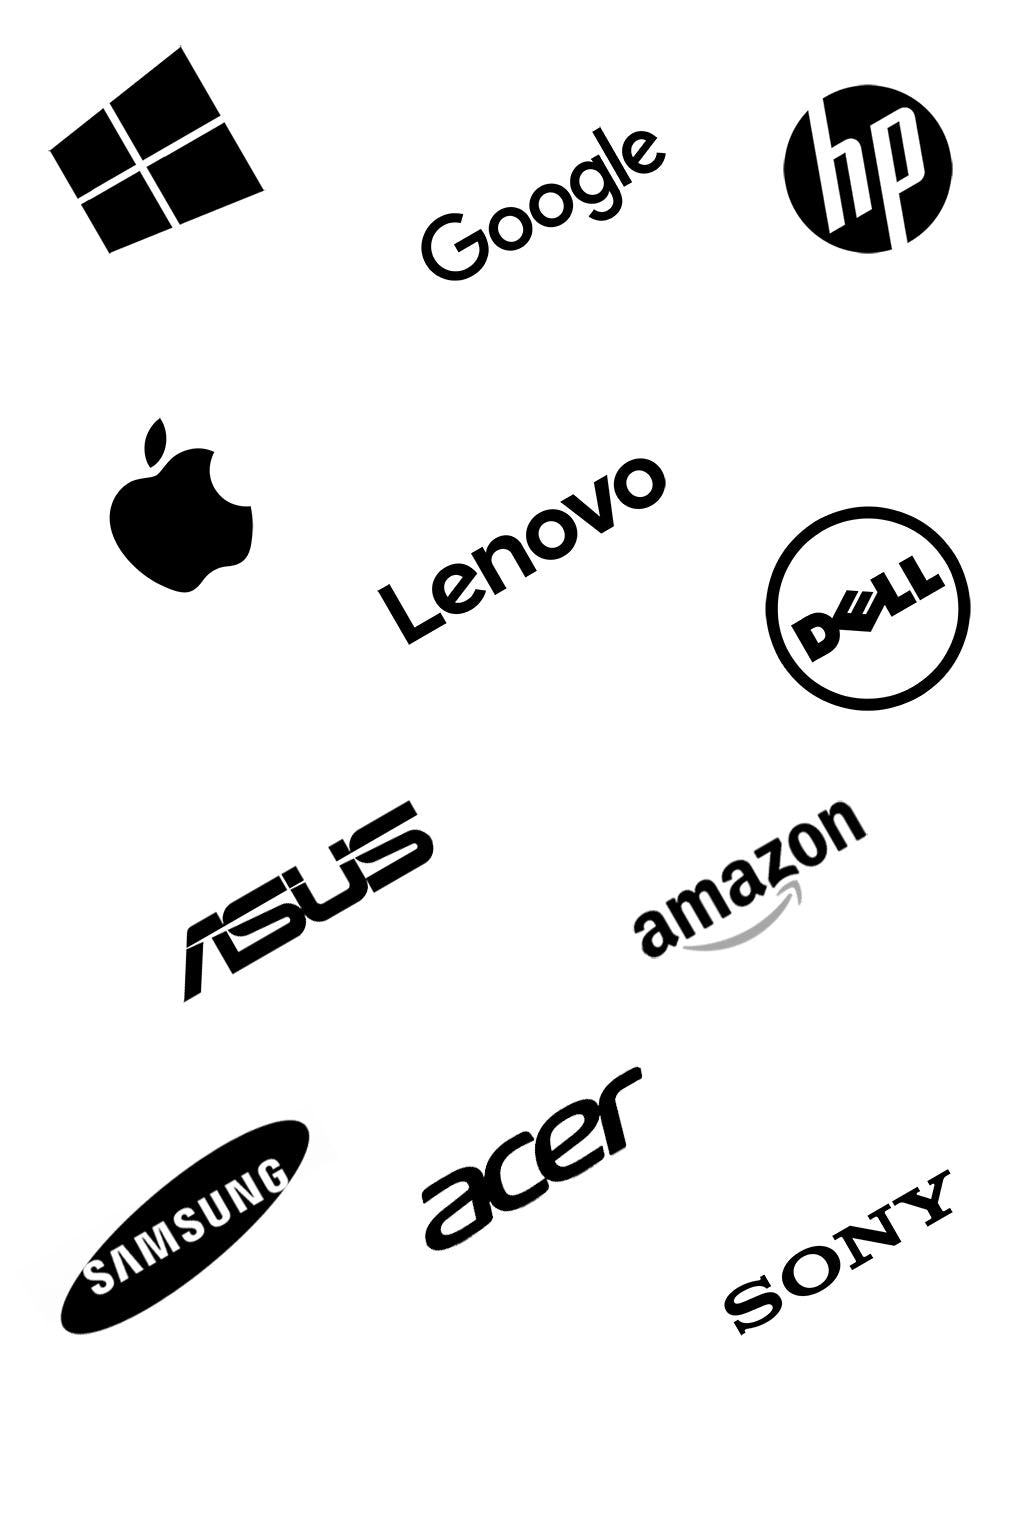 Brands we support at Armodilo